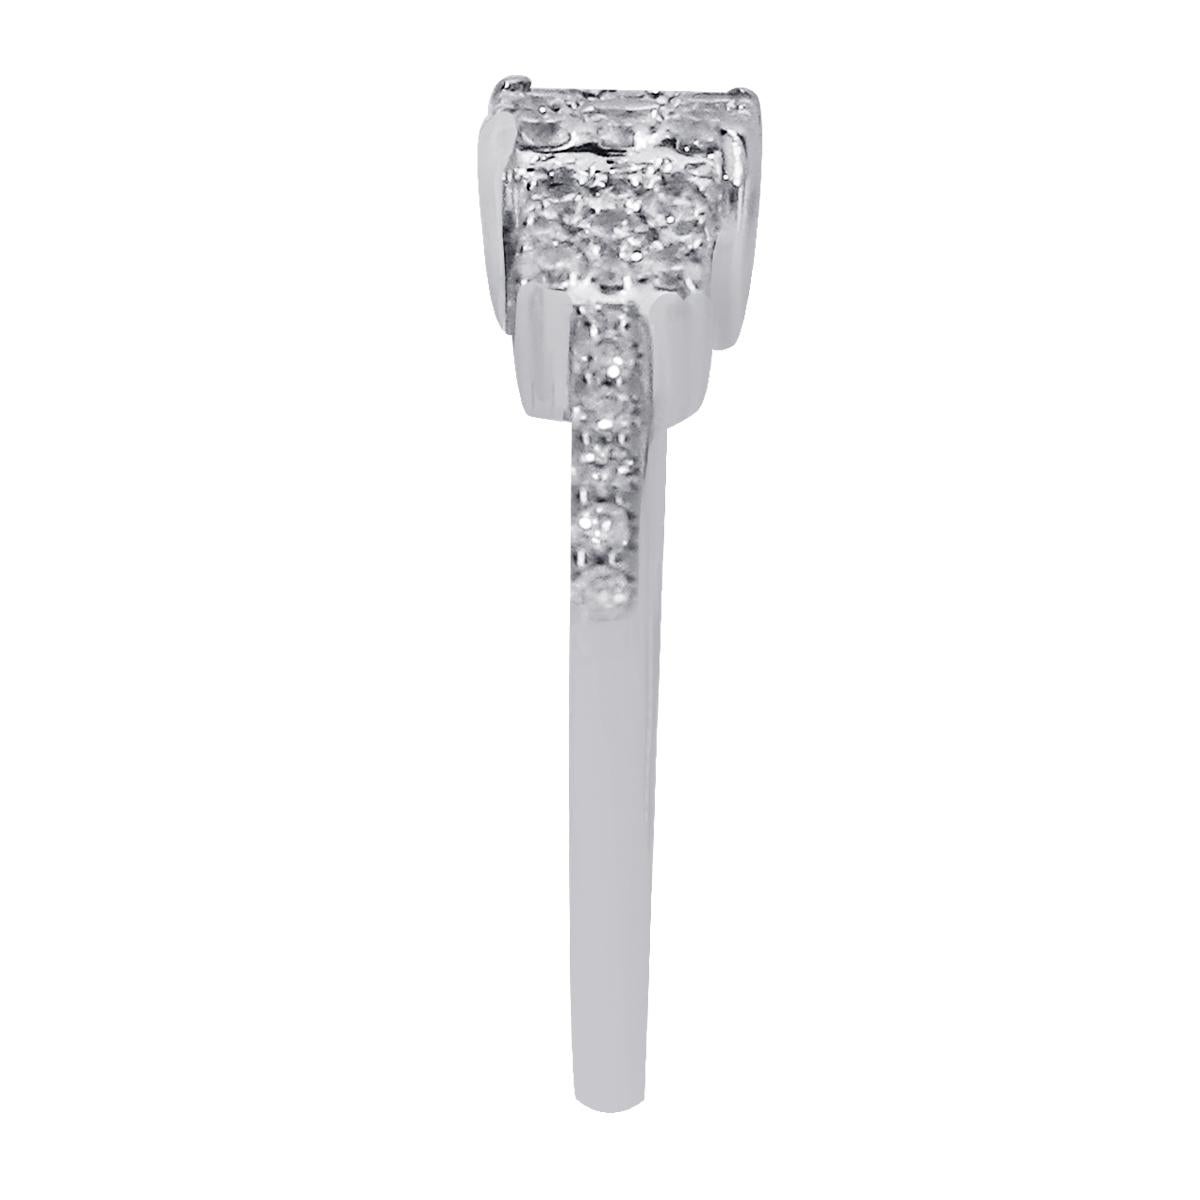 Material: 14k White Gold
Diamond Details: Approximately 0.50ctw round brilliant diamonds. Diamonds are G/H in color and SI in clarity
Ring Size: 5
Item Weight: 2.1g (1.4dwt)
Measurements: 0.75″ x 0.21″ x 0.80″
SKU: G8542